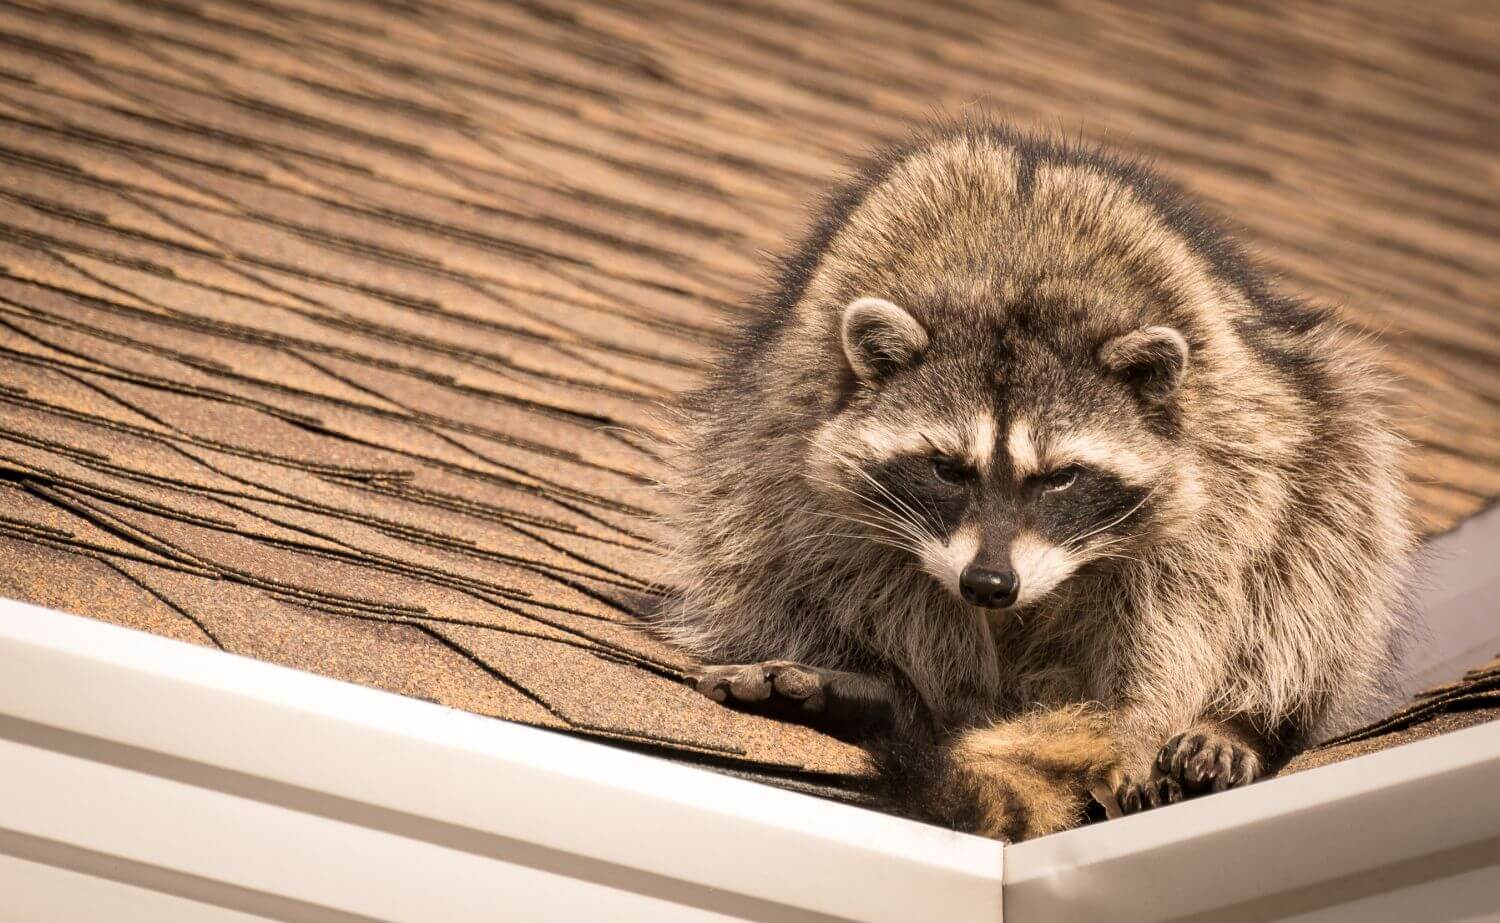 How To Protect Your Roof From Critters